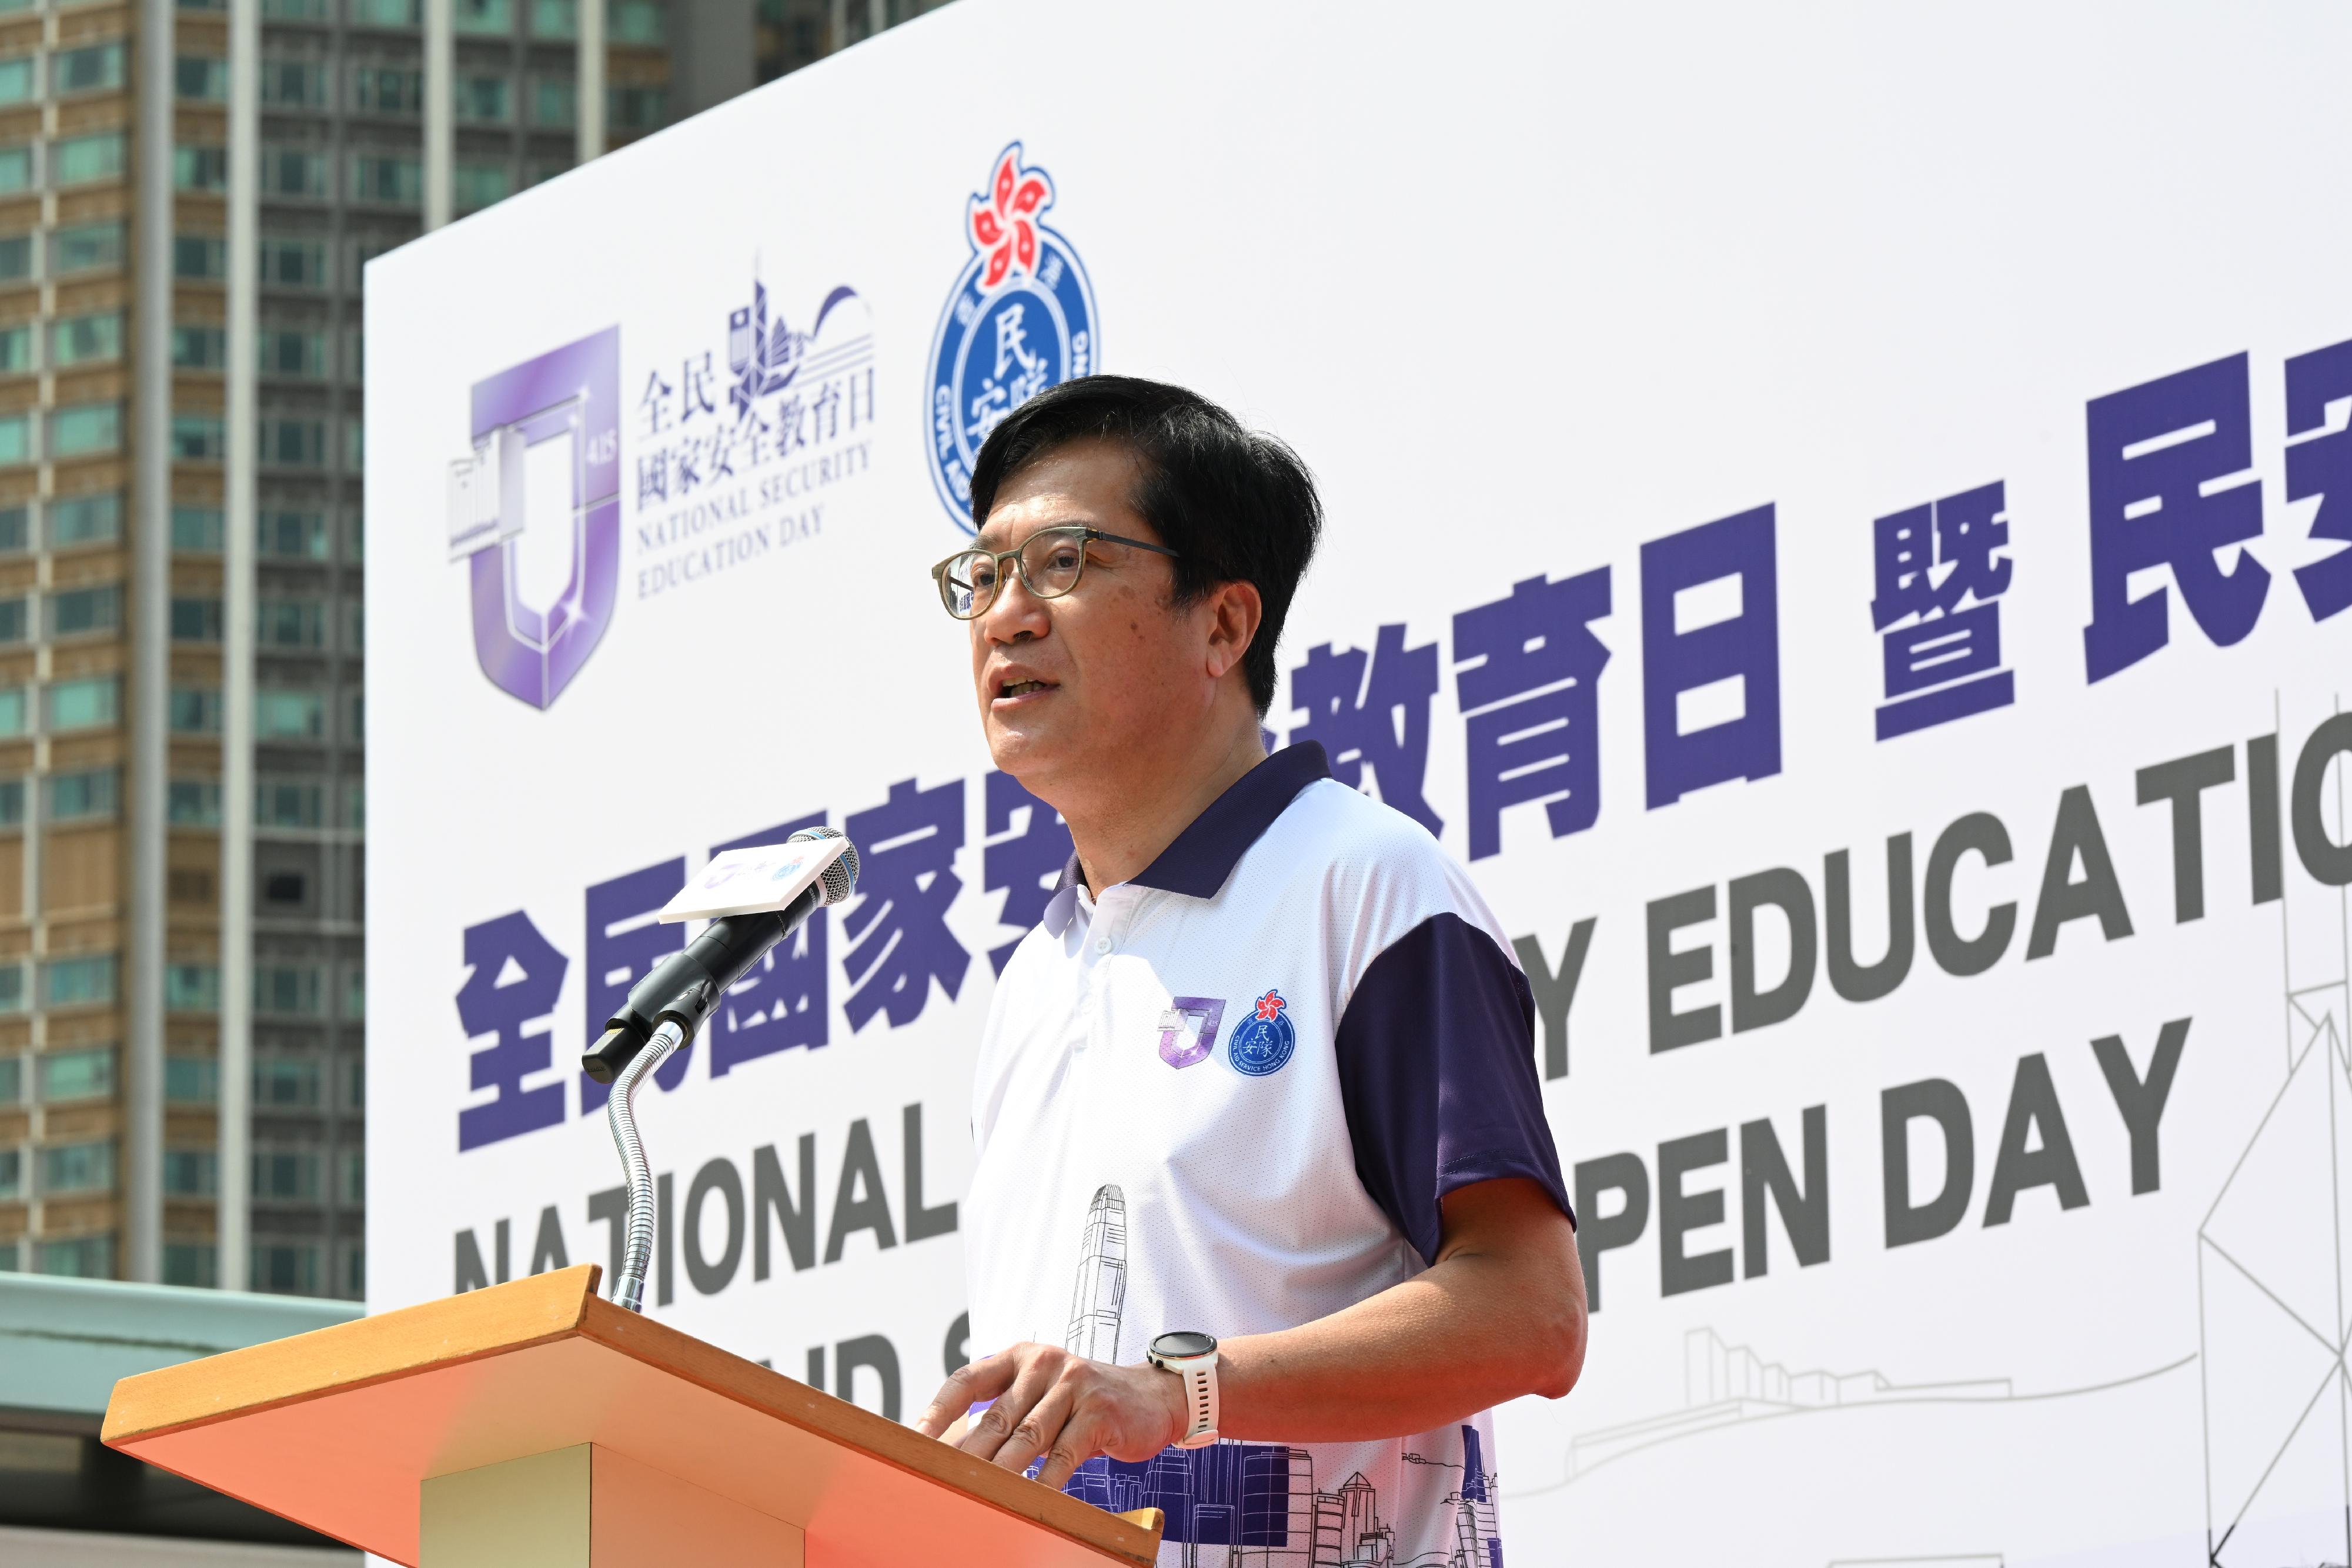 The Civil Aid Service held an open day at its headquarters today (April 14) to promote the National Security Education Day. Photo shows the Deputy Financial Secretary, Mr Michael Wong, giving a speech.